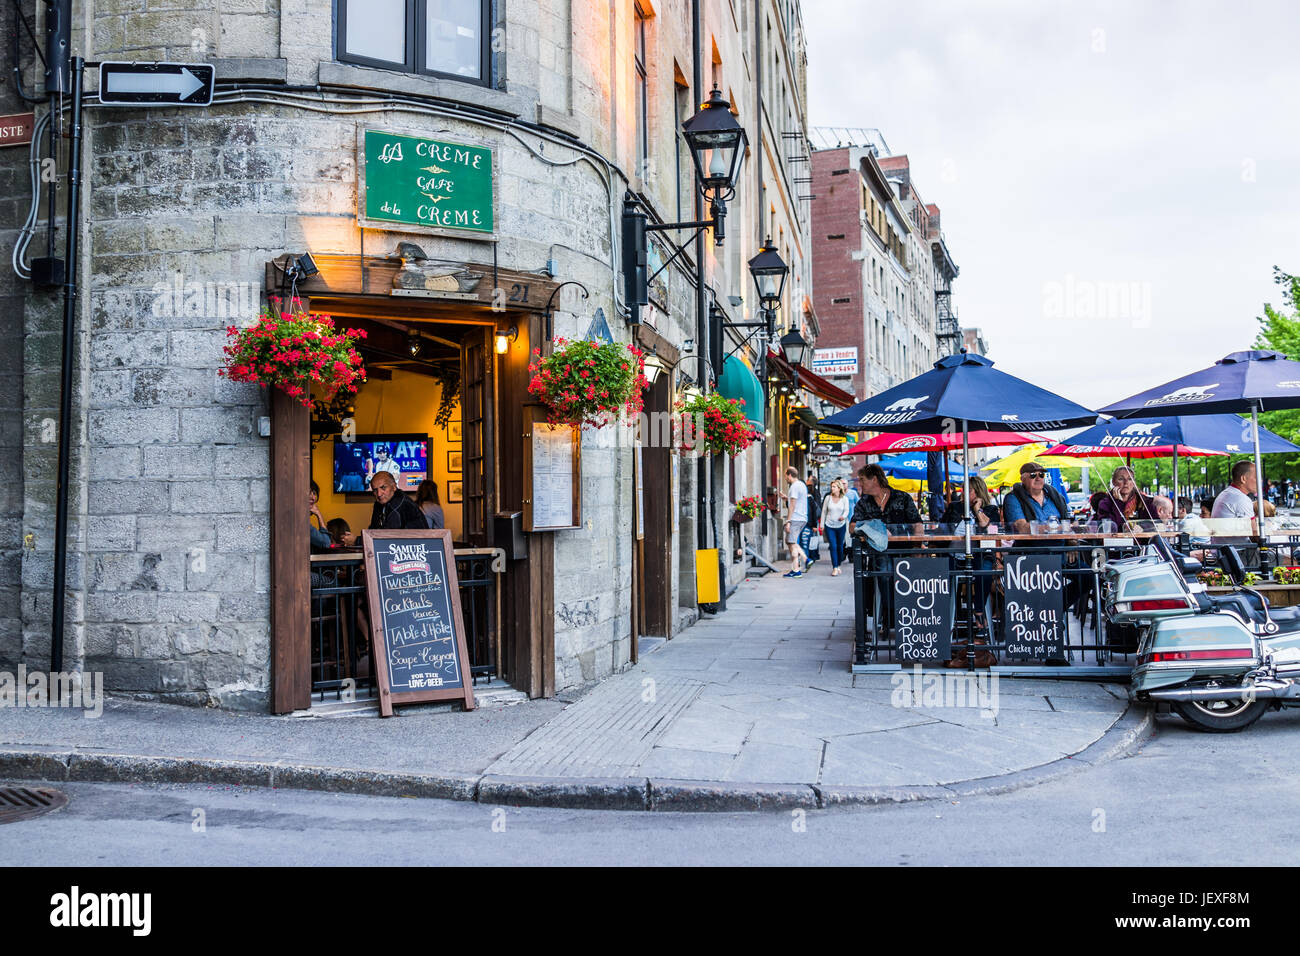 Montreal, Canada - May 27, 2017: Old town area with people sitting by street in evening outside restaurant called La Creme de la Creme in Quebec regio Stock Photo